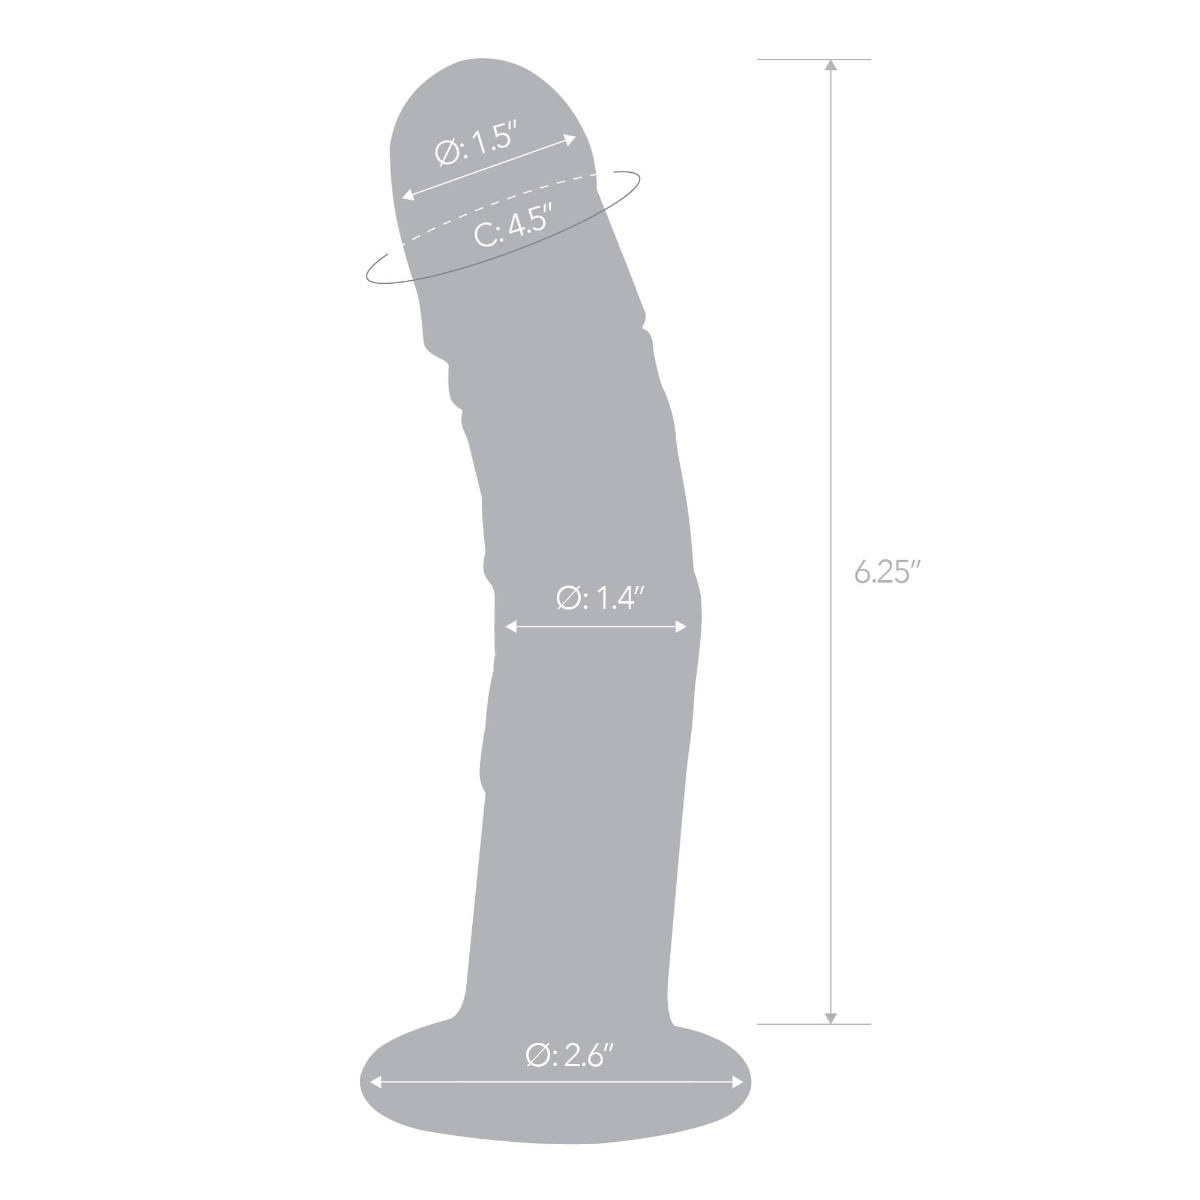 7” curved realistic glass dildo with veins